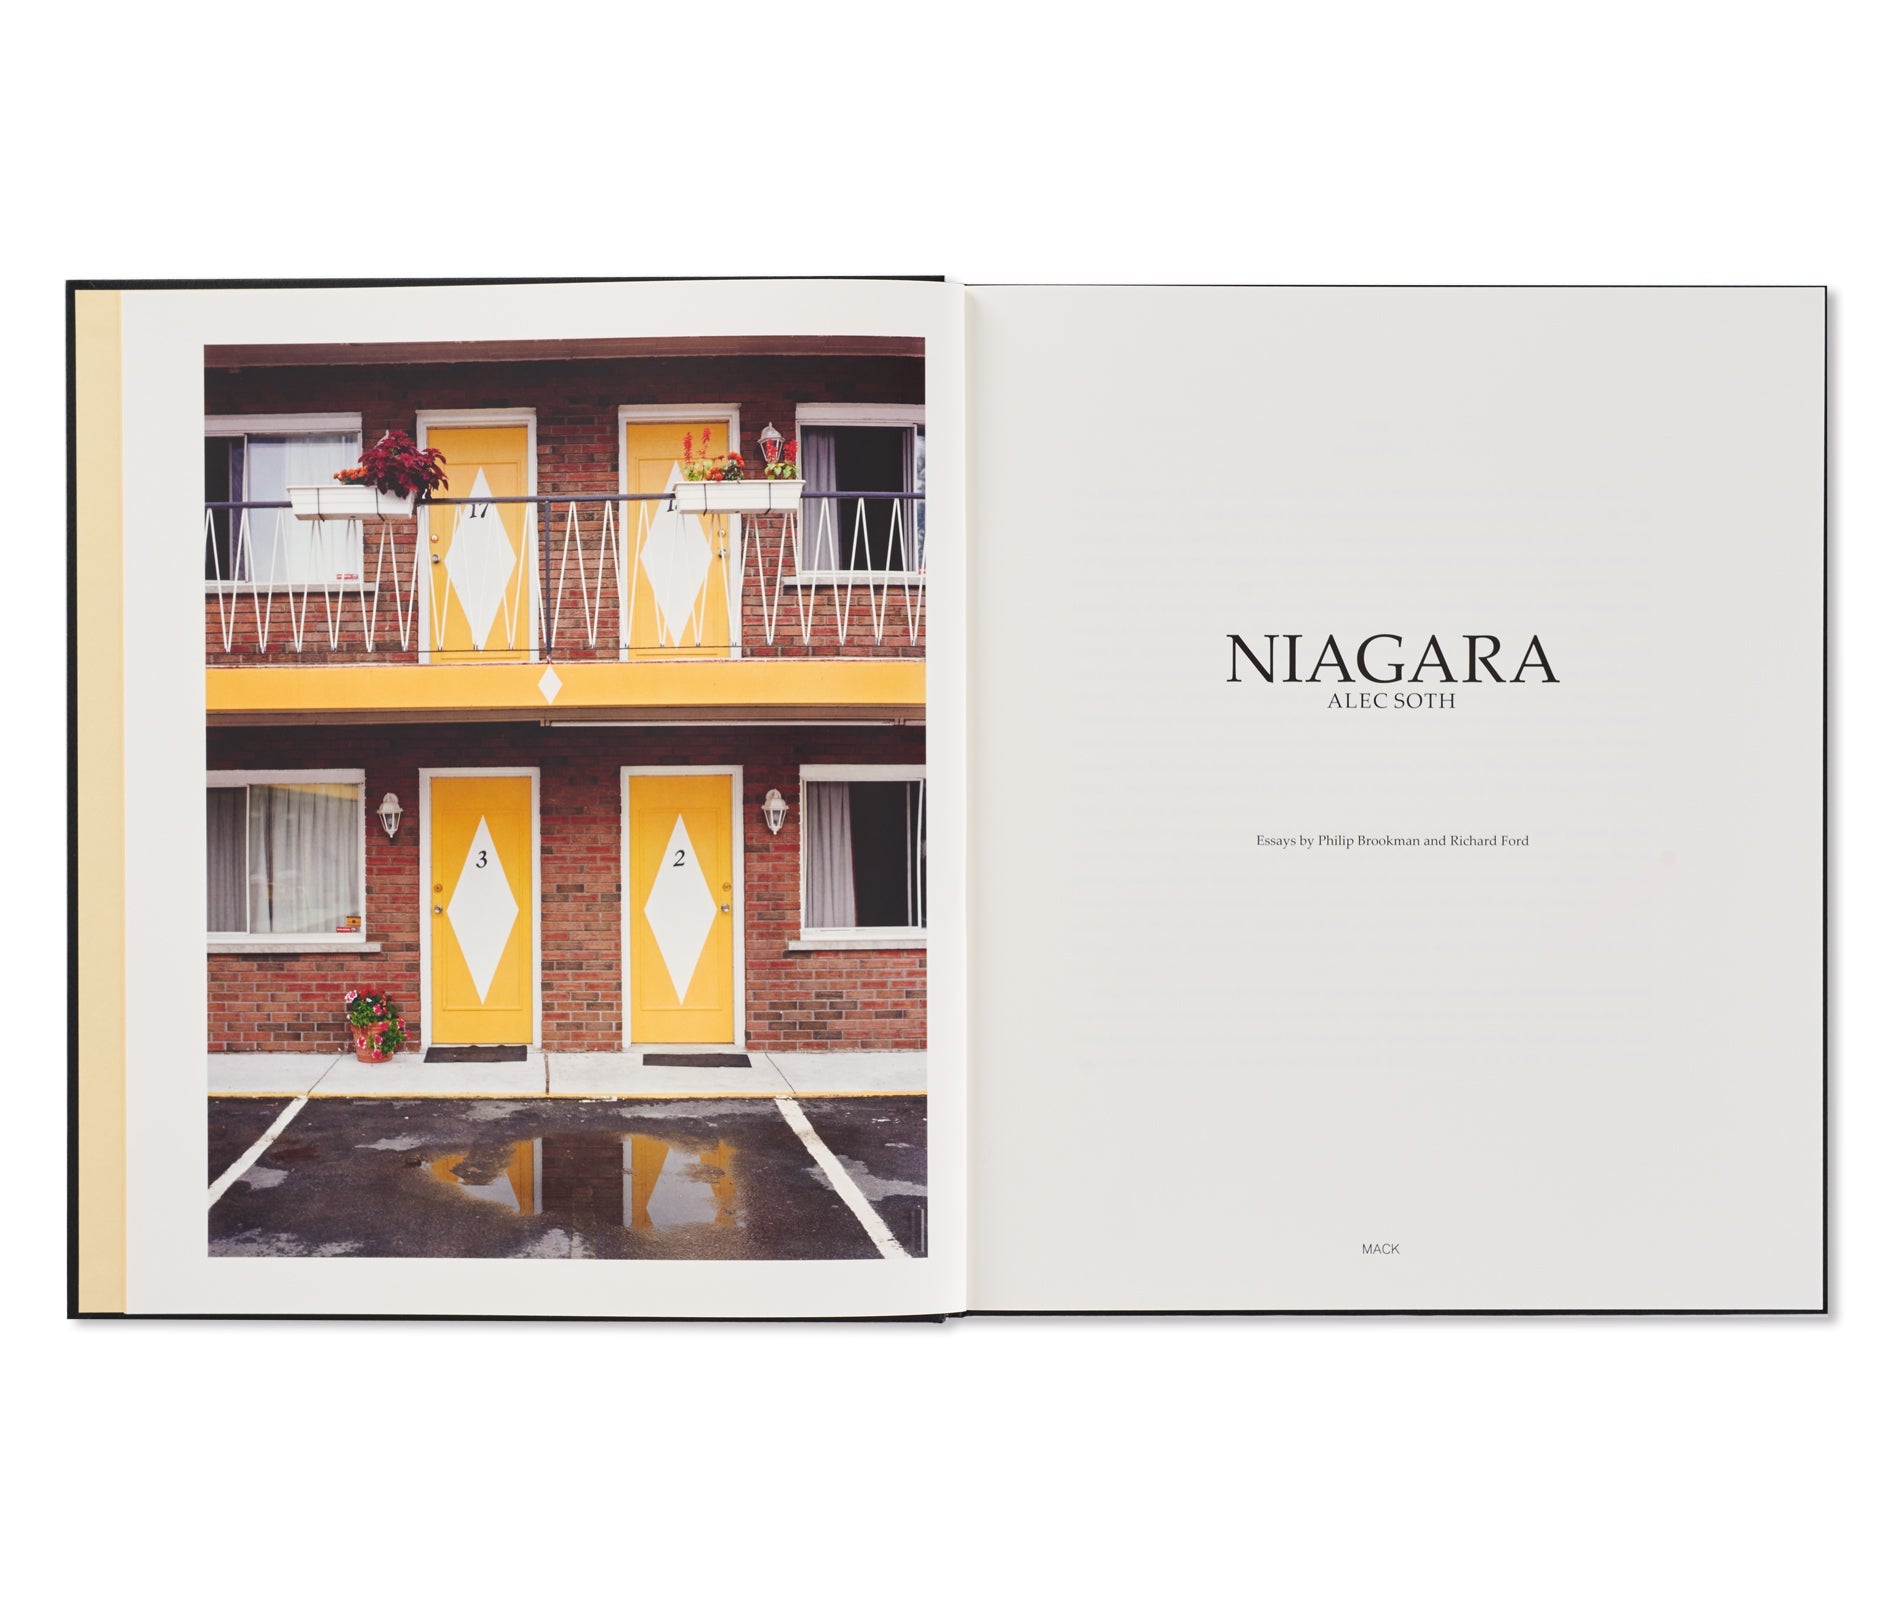 NIAGARA by Alec Soth [FIRST EDITION, SECOND PRINTING]